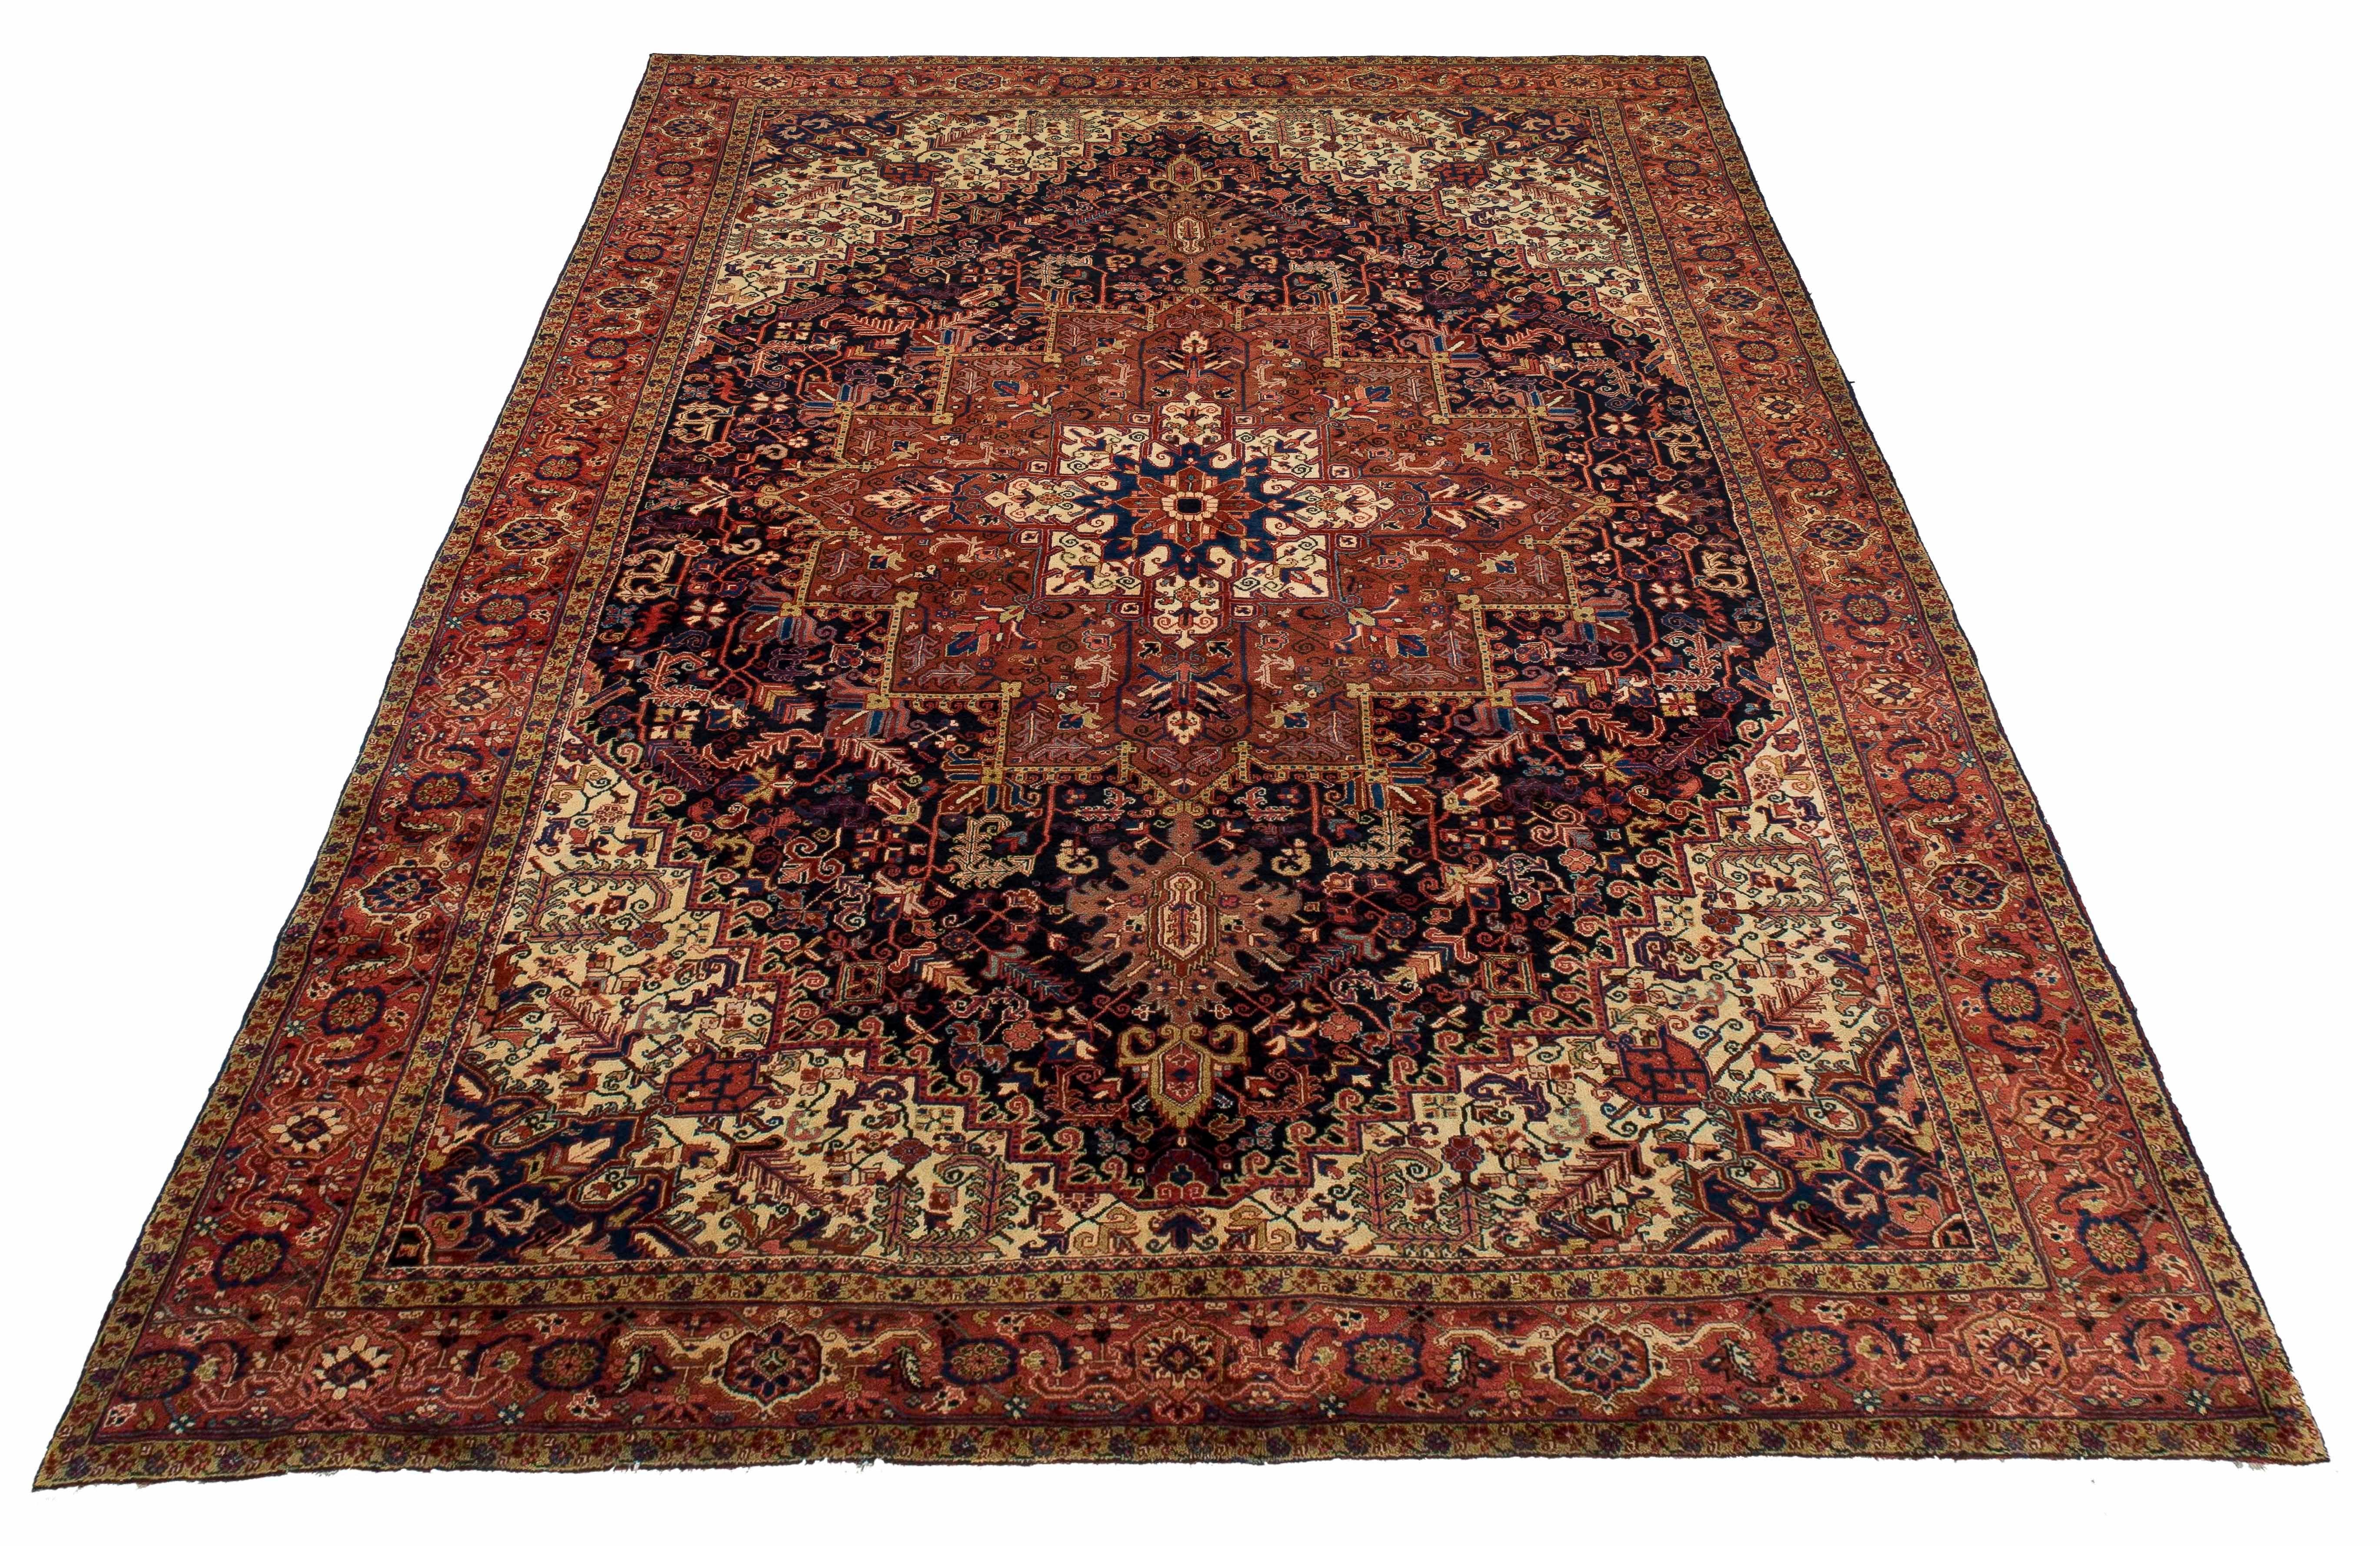 This carpet was woven in Northwest Persia (Iran) in an area located some 40 to 50 miles
due east of the city of Tabriz – the provincial capital of Persian Azerbaijan and one-time capital of Imperial Persia prior to the fifteenth century. This